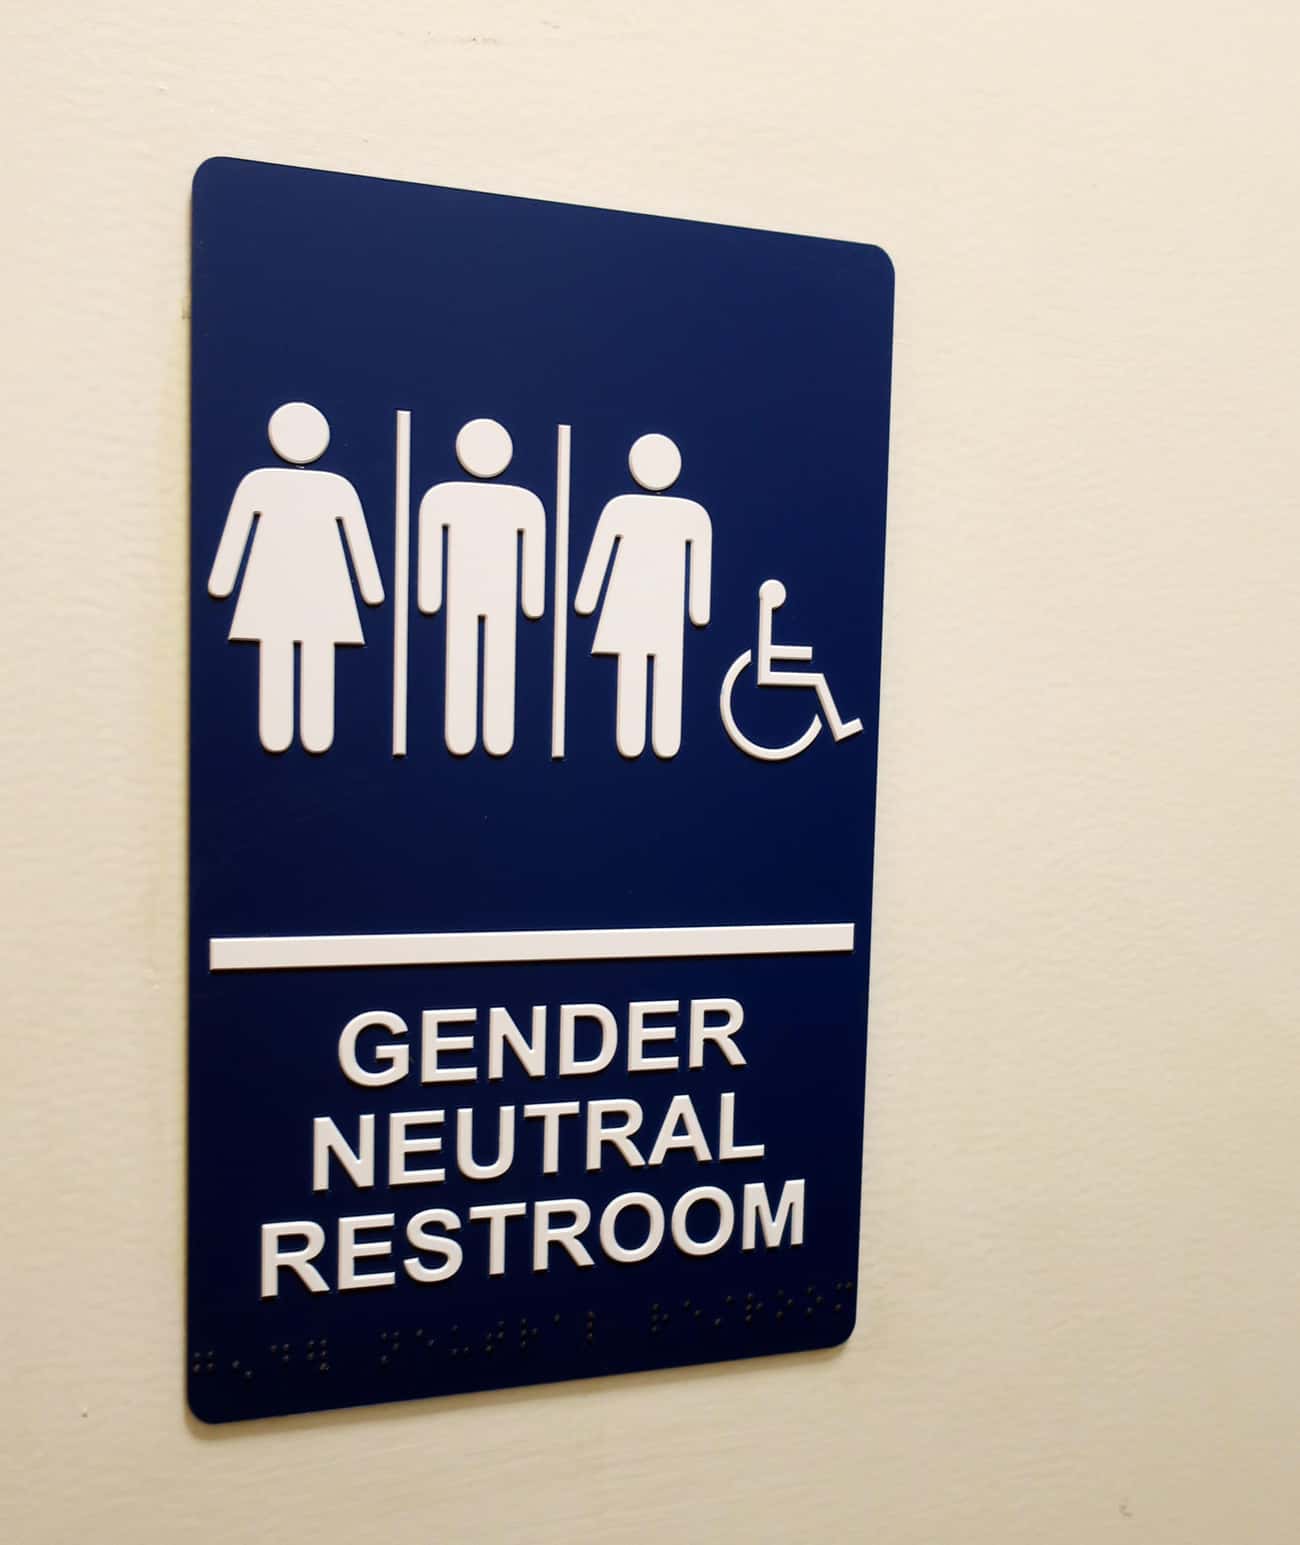 A Concert-Goer Sued A Park For Not Labeling Restrooms Well Enough